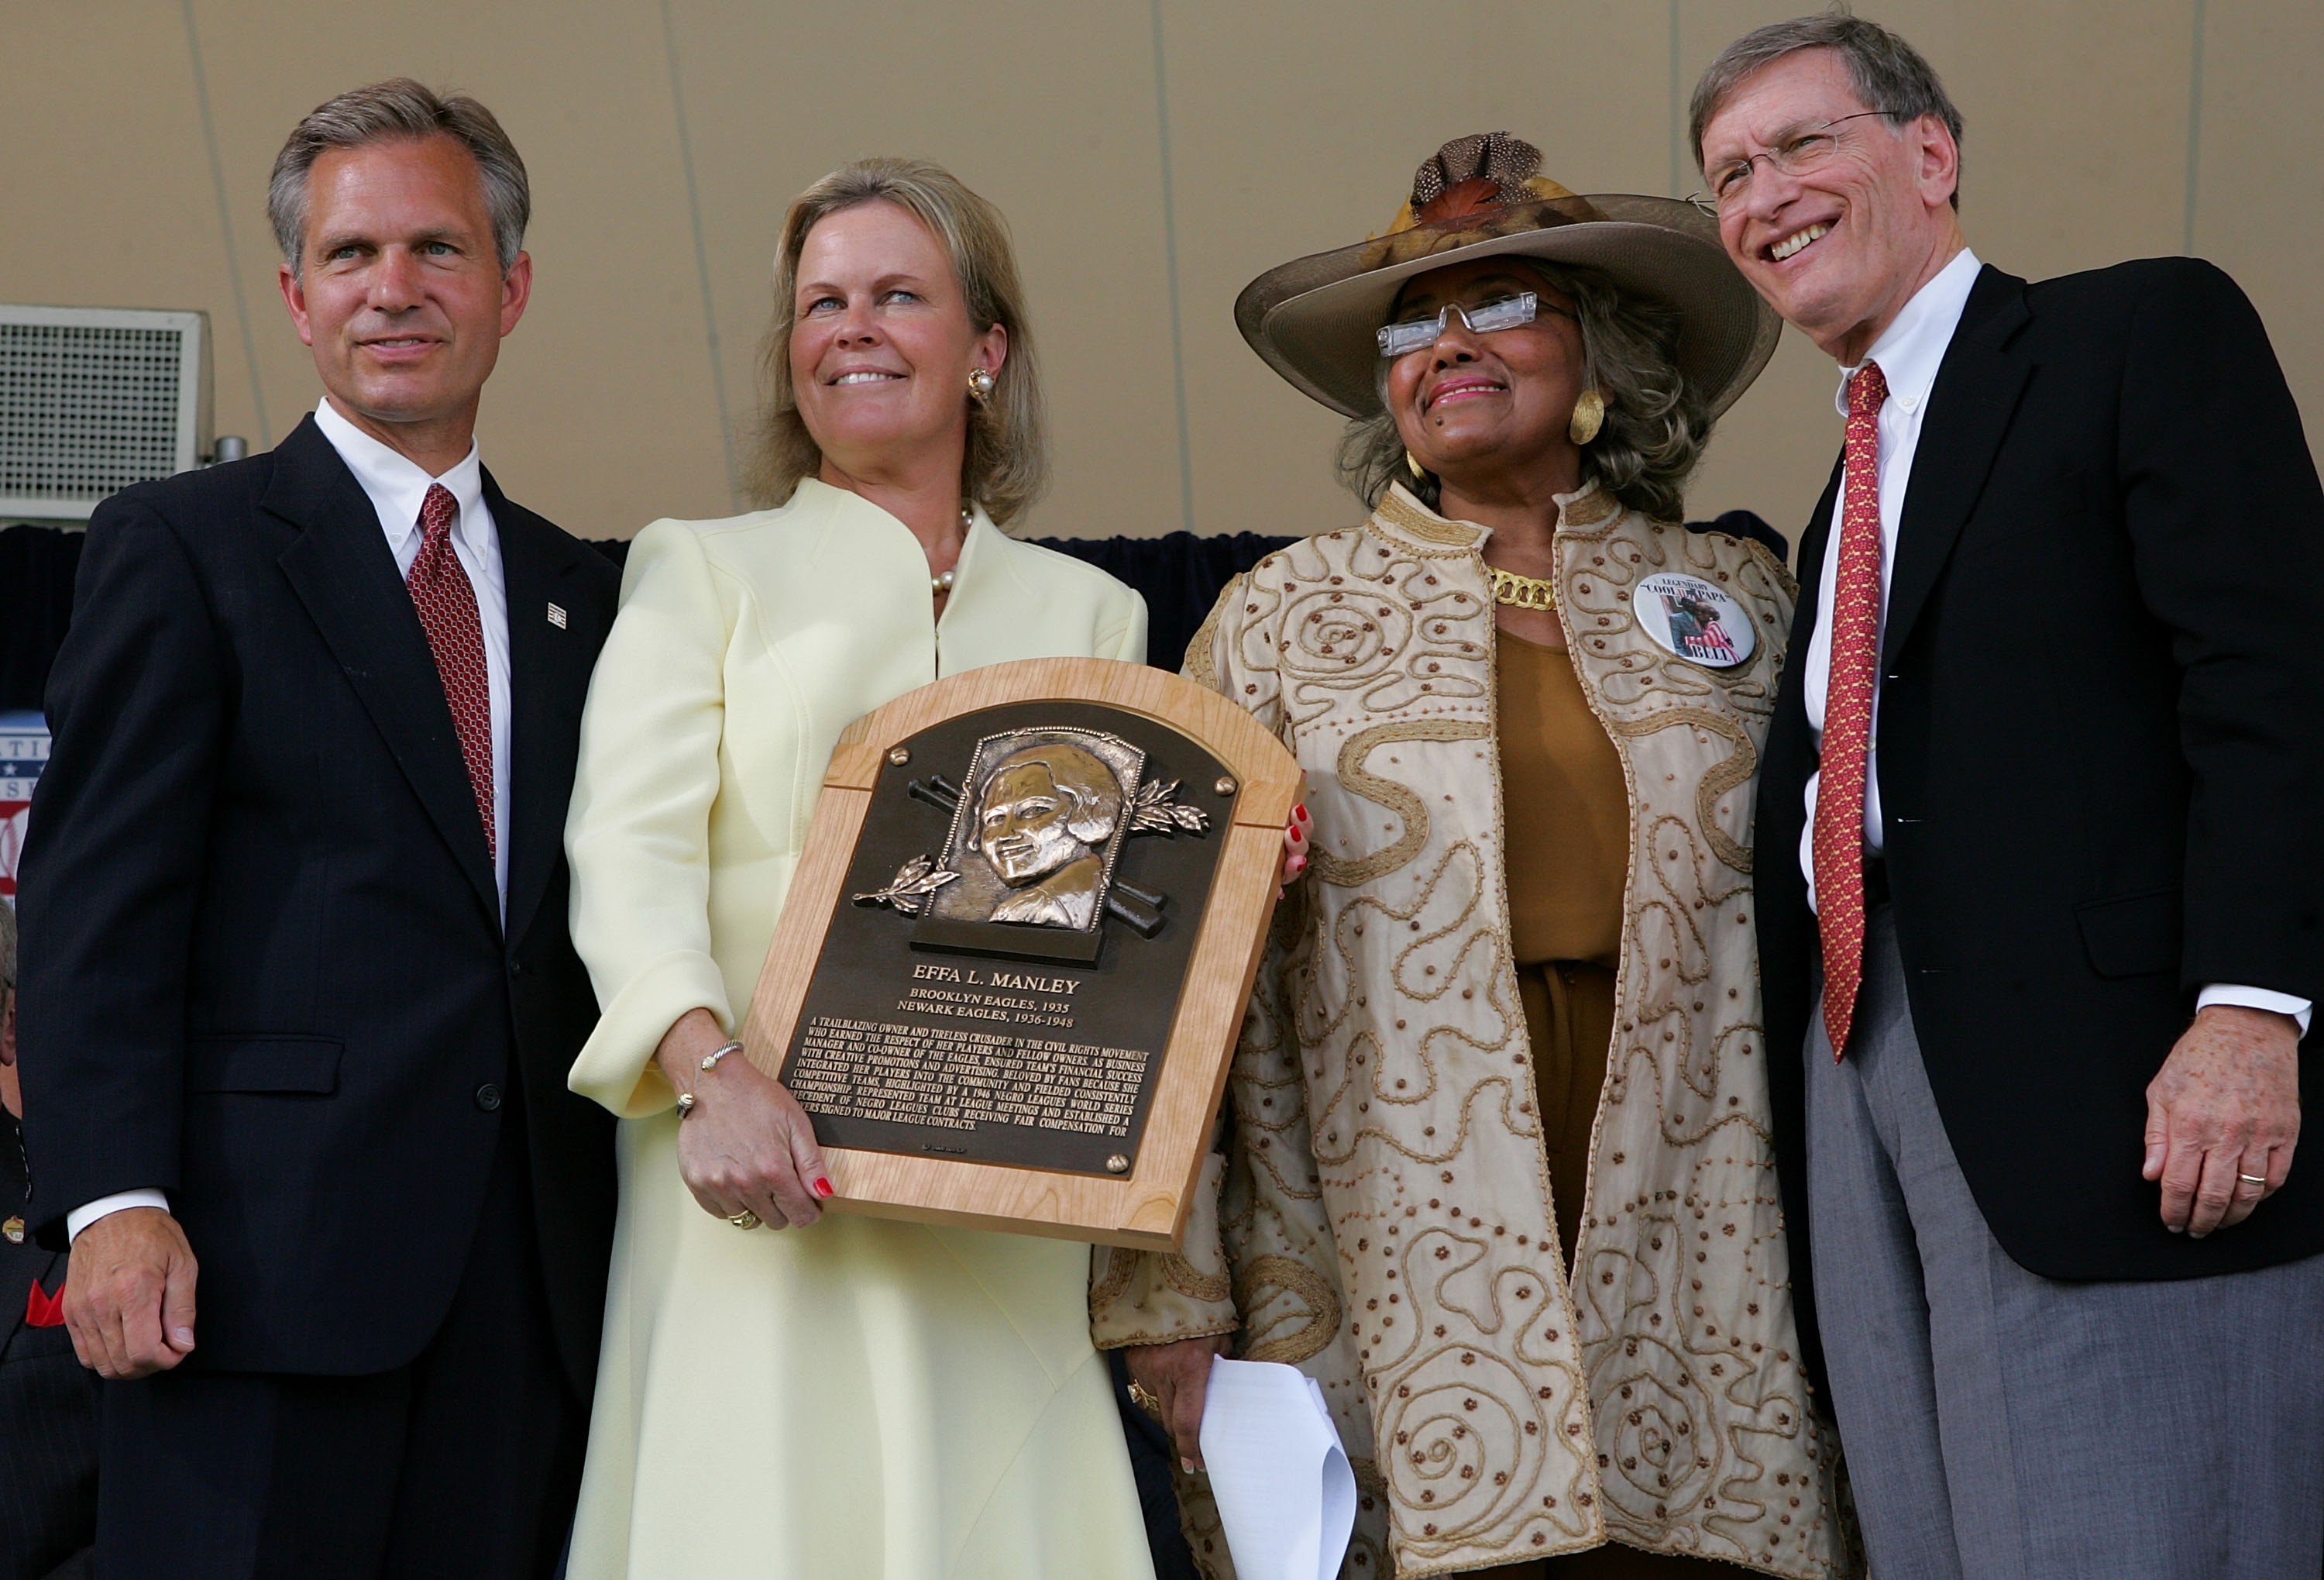 It was posthumous, but Manley became the first woman ever elected to the Baseball Hall of Fame in 2006.